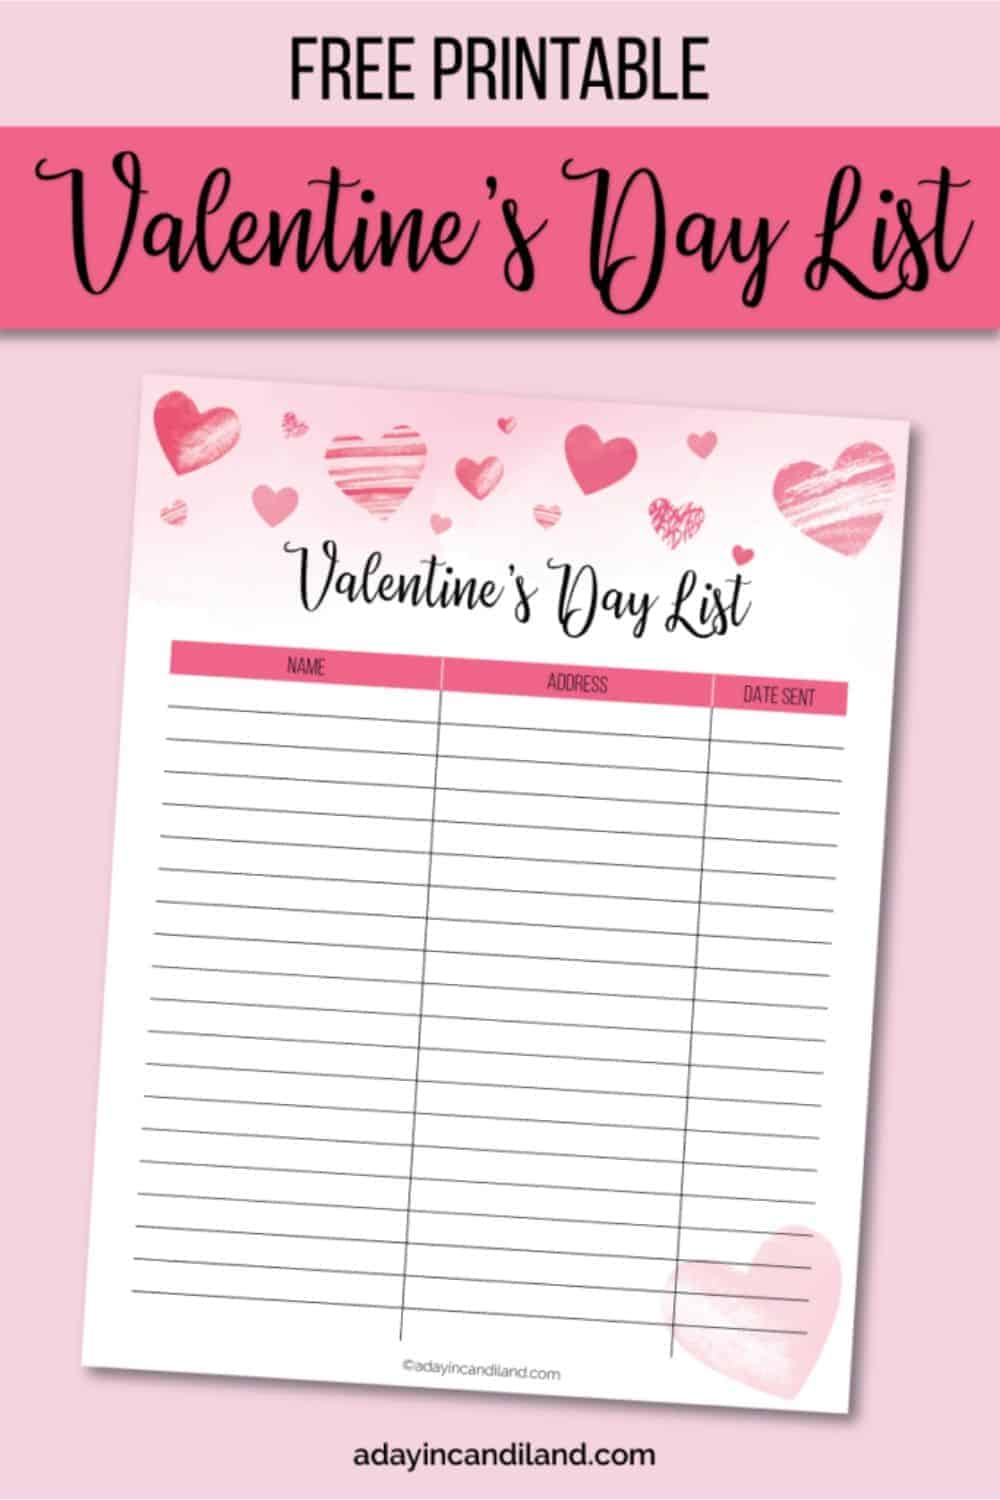 valentines-day-gift-list-printable-a-day-in-candiland